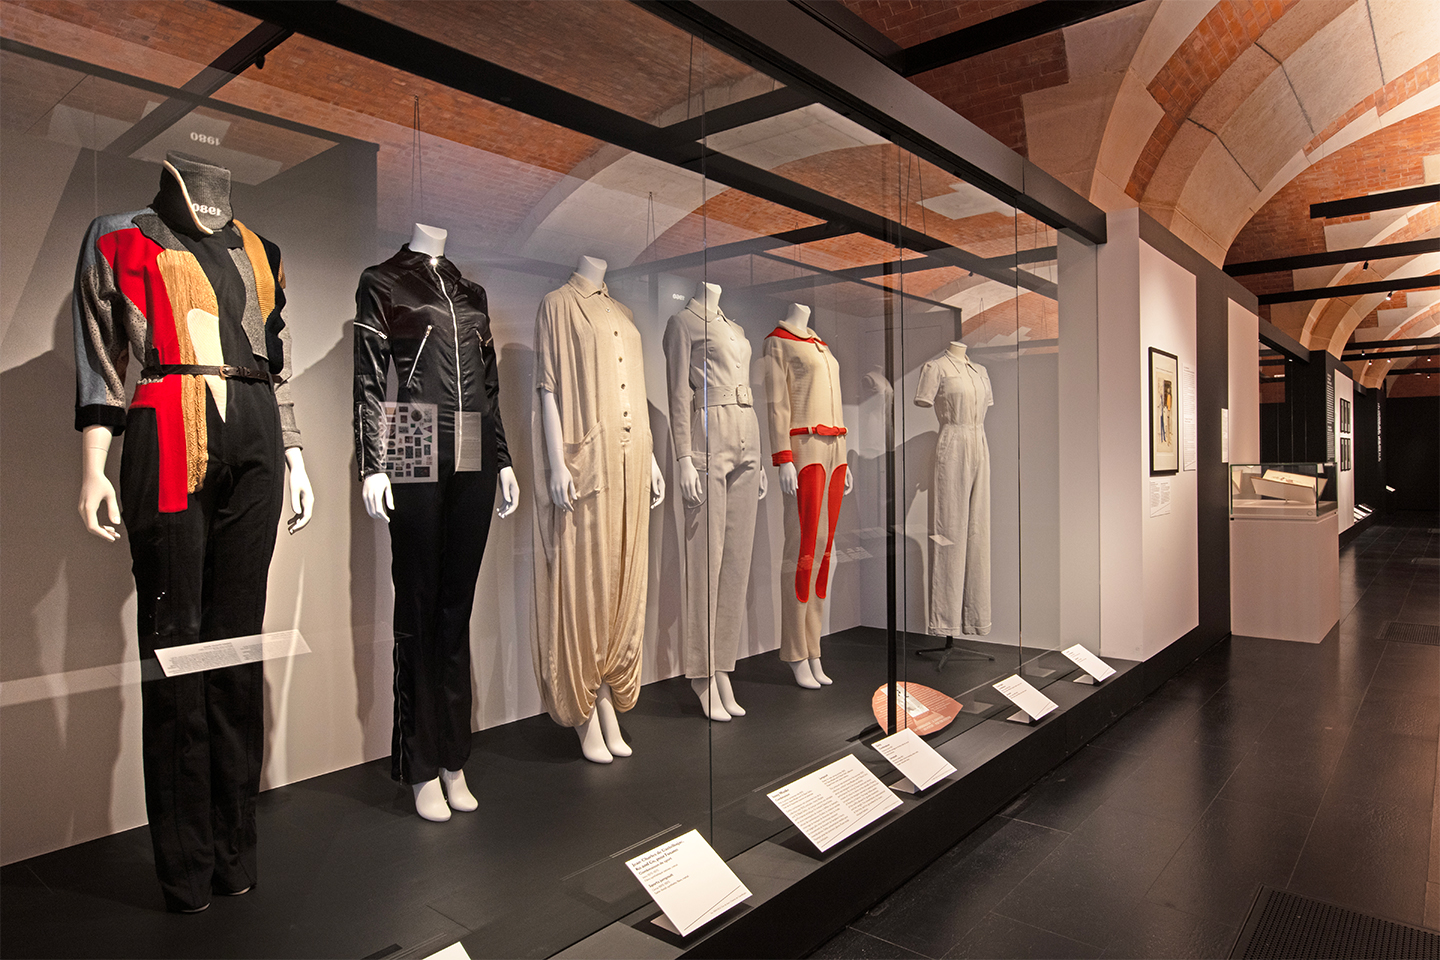 The section on the 1960s and 70s showcases the emergence of ready-to-wear and the influence of youth culture on fashion. © Palais Galliera / Paris Musées, photo Gautier Deblonde